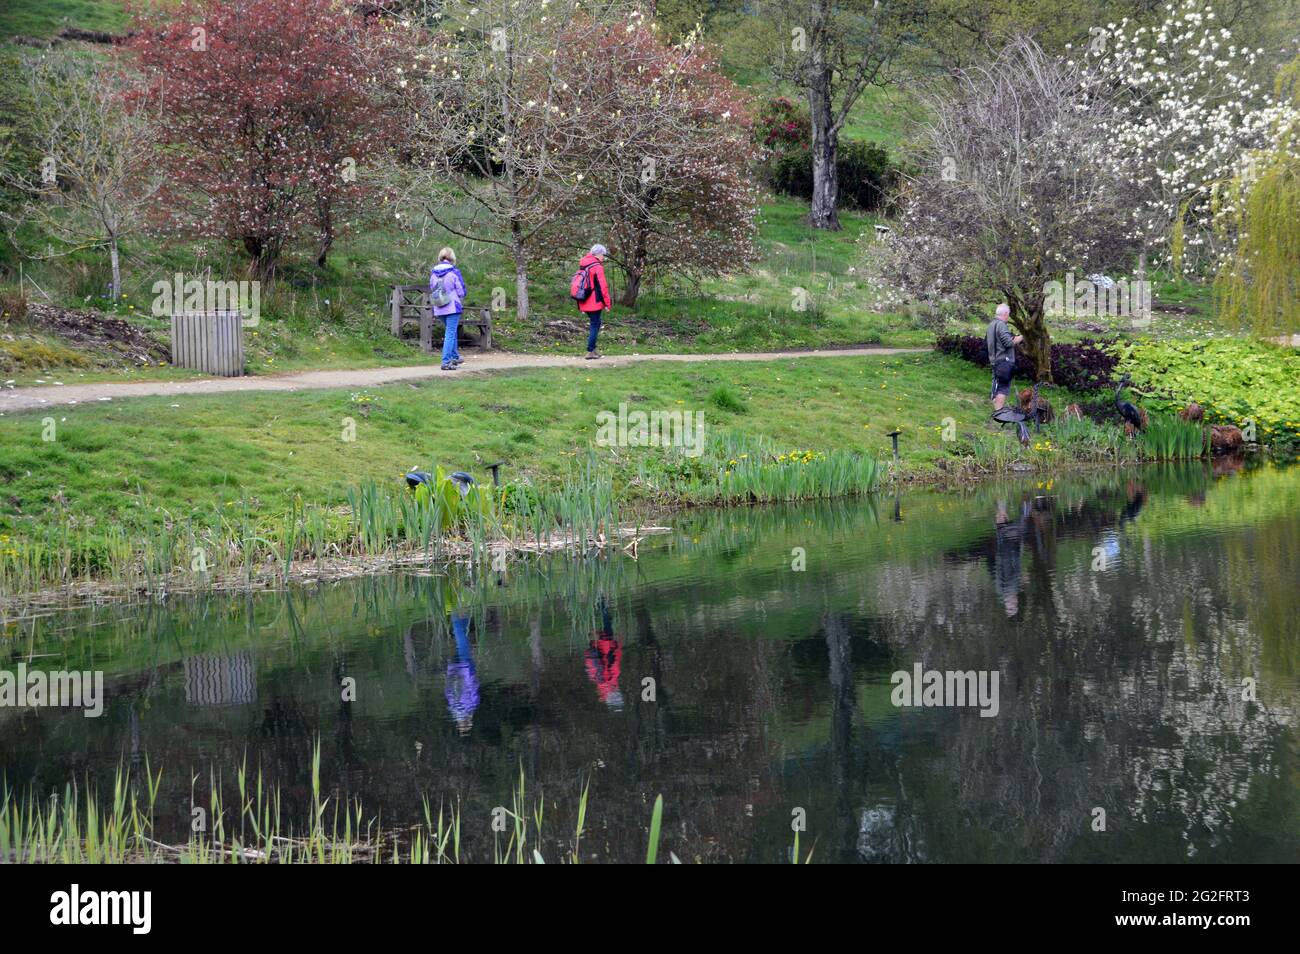 A Couple of Woman Walking by the Magnolia Lake, Himalayan Garden & Sculpture Park, Grewelthorpe, Ripon, North Yorkshire, UK. Stock Photo